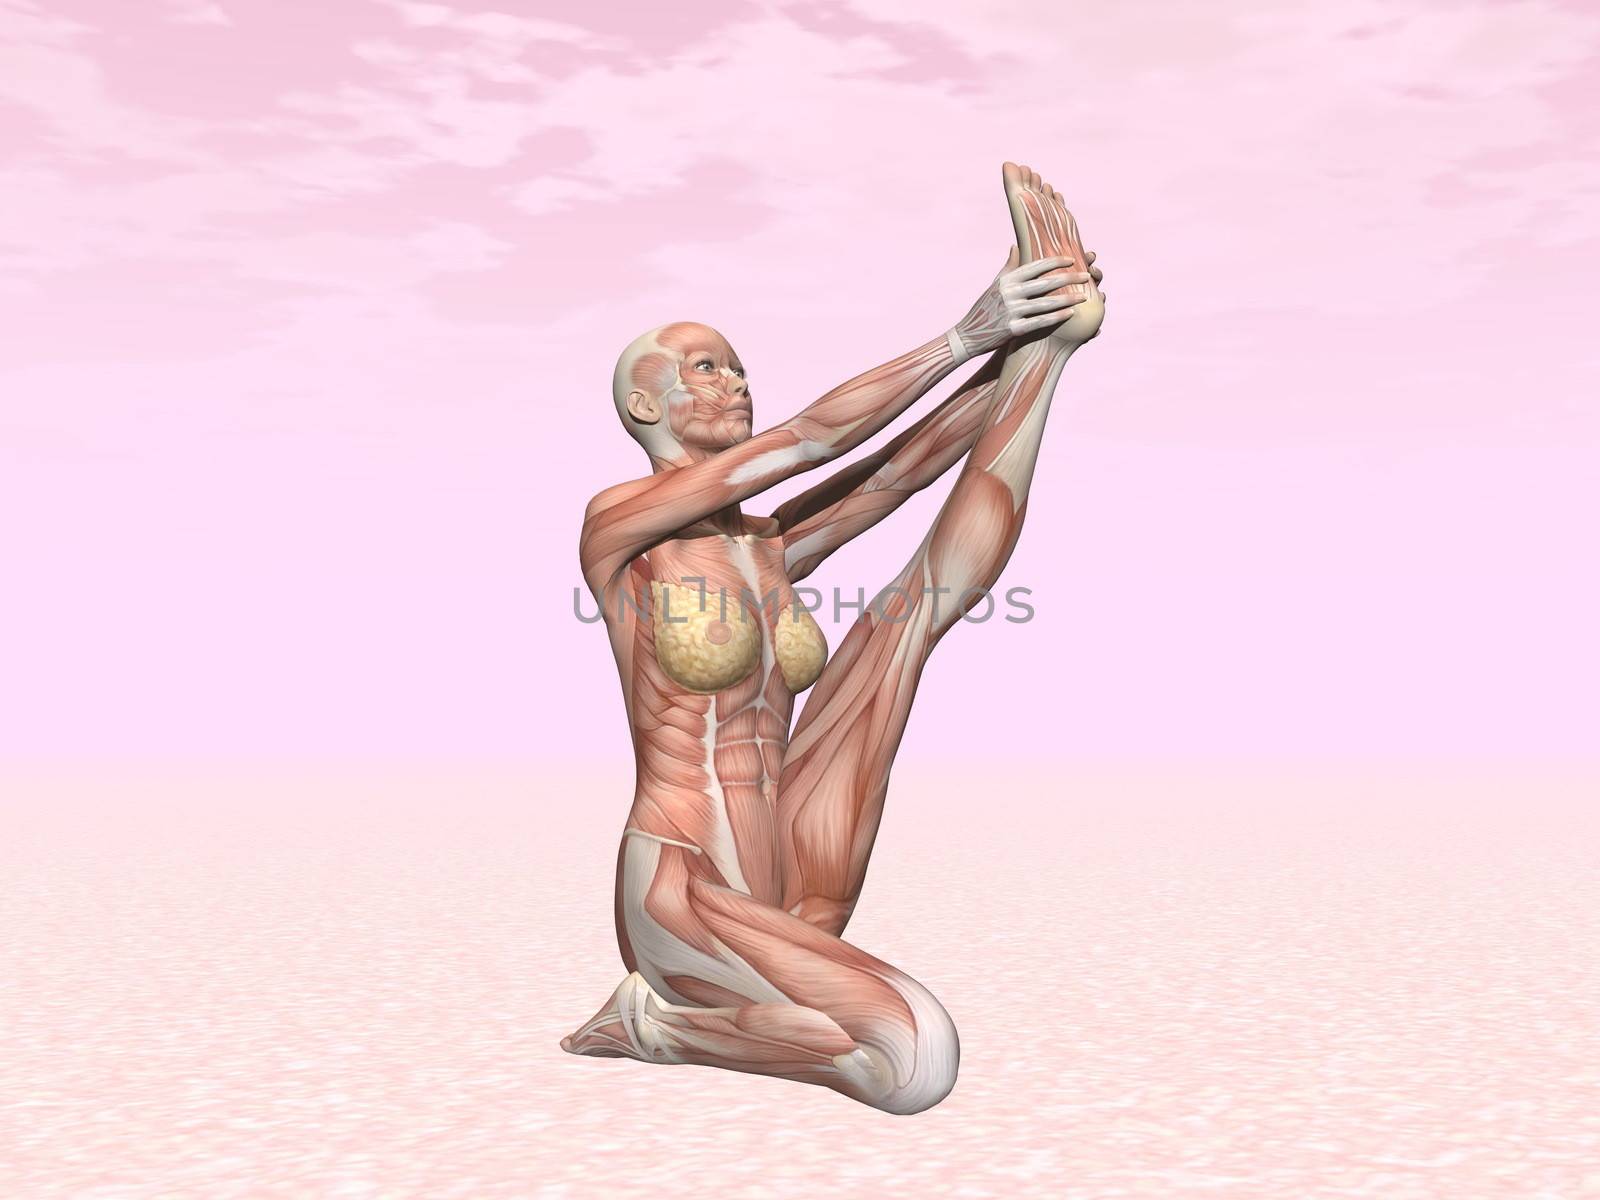 Heron yoga pose for woman with muscle visible in pink background